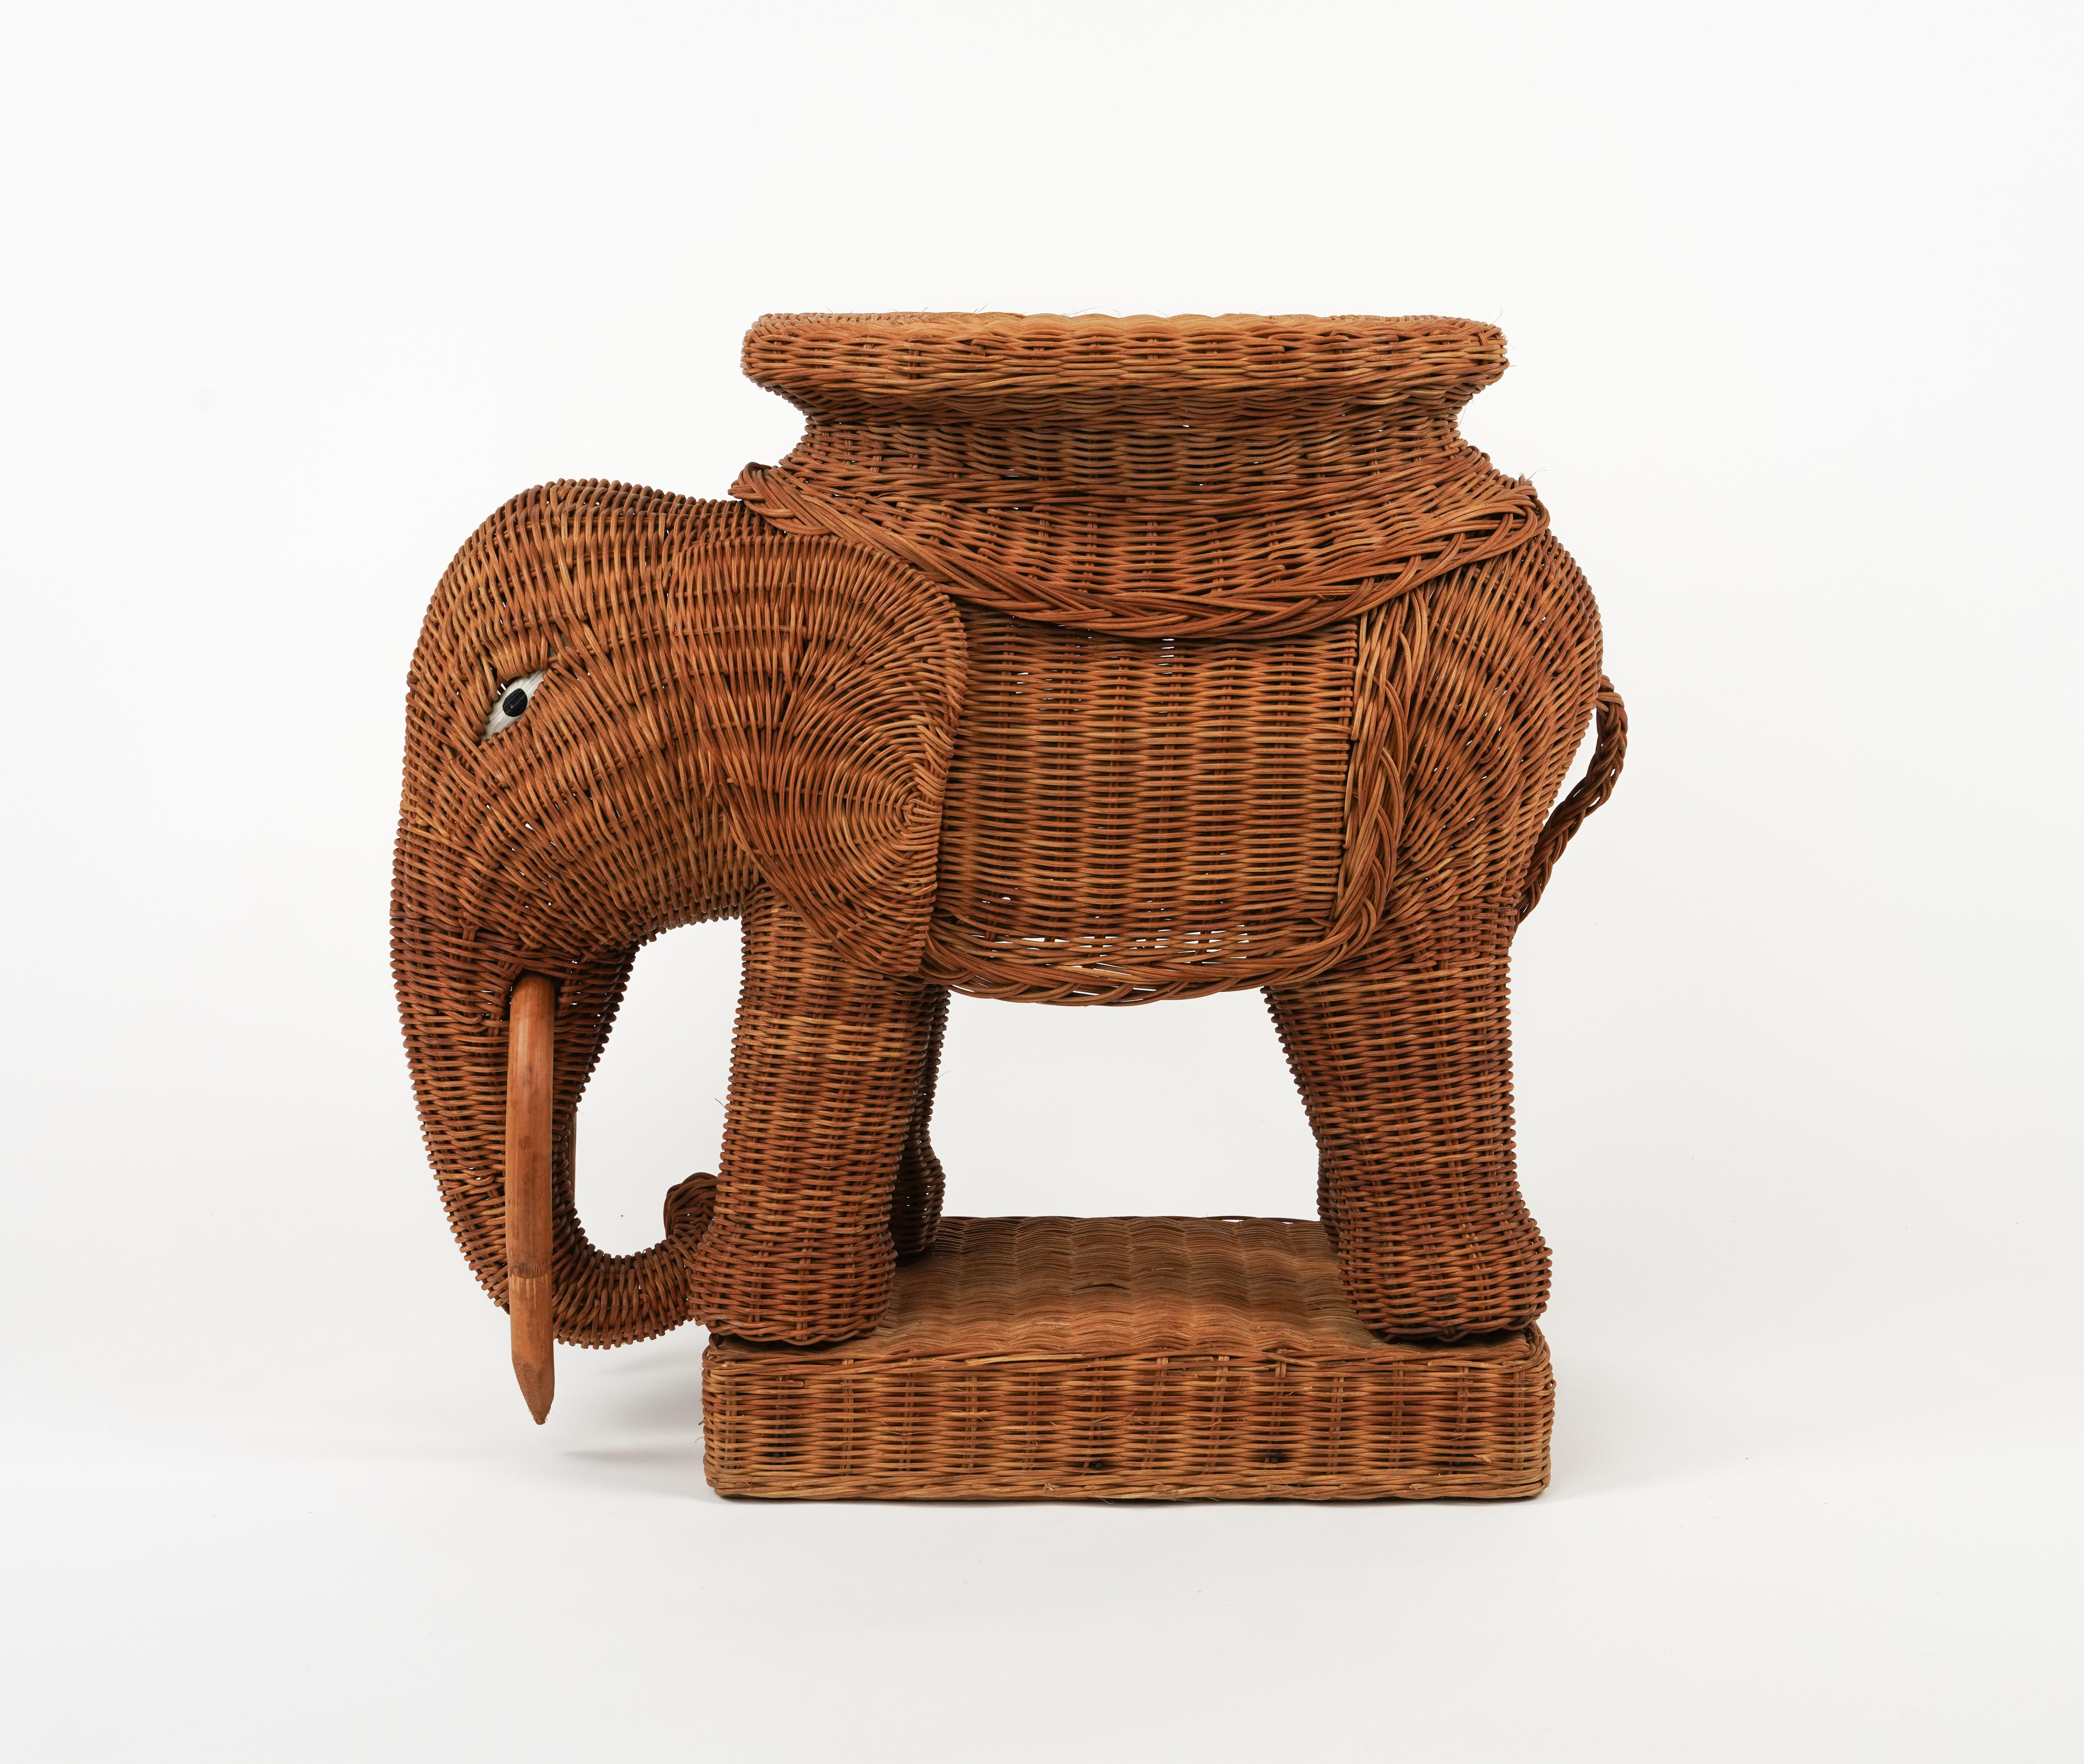 Rattan and Wicker Elephant Side Coffee Table Vivai Del Sud Style, Italy, 1960s For Sale 9